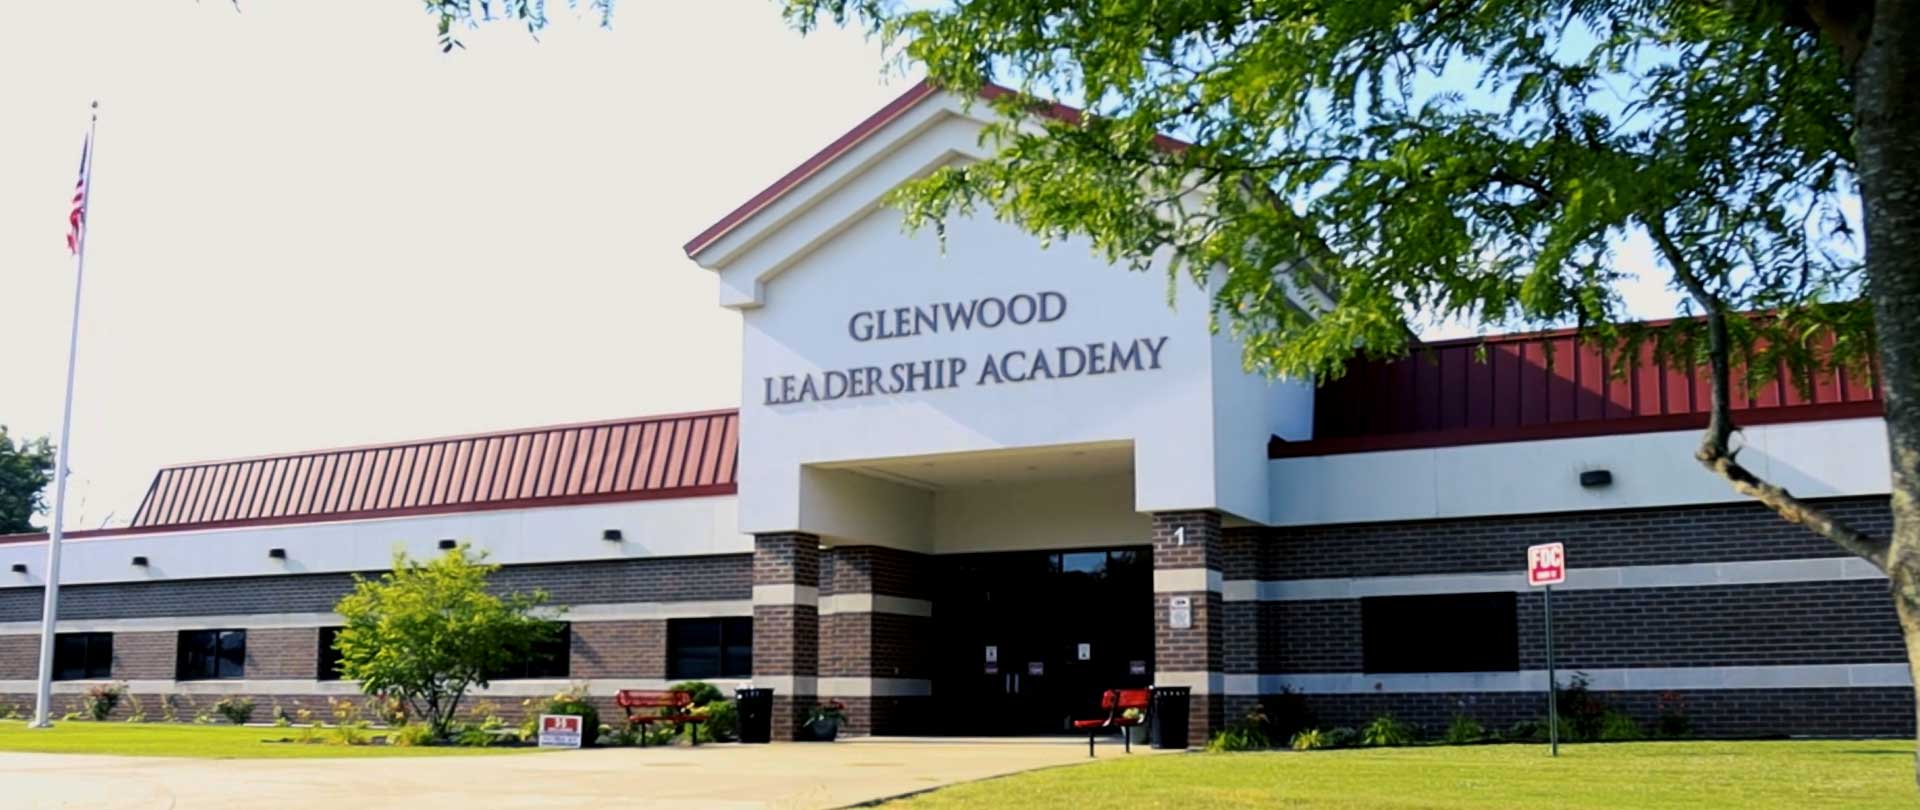 Glenwood Leadership Academy

SUPPORT TEACHERS AND STUDENTS AT A SCHOOL THAT'S BEATING THE ODDS.

Glenwood Leadership Academy is a thriving public school in under-resourced neighborhoods. We’ve been blessed to have a 10+ year partnership...
